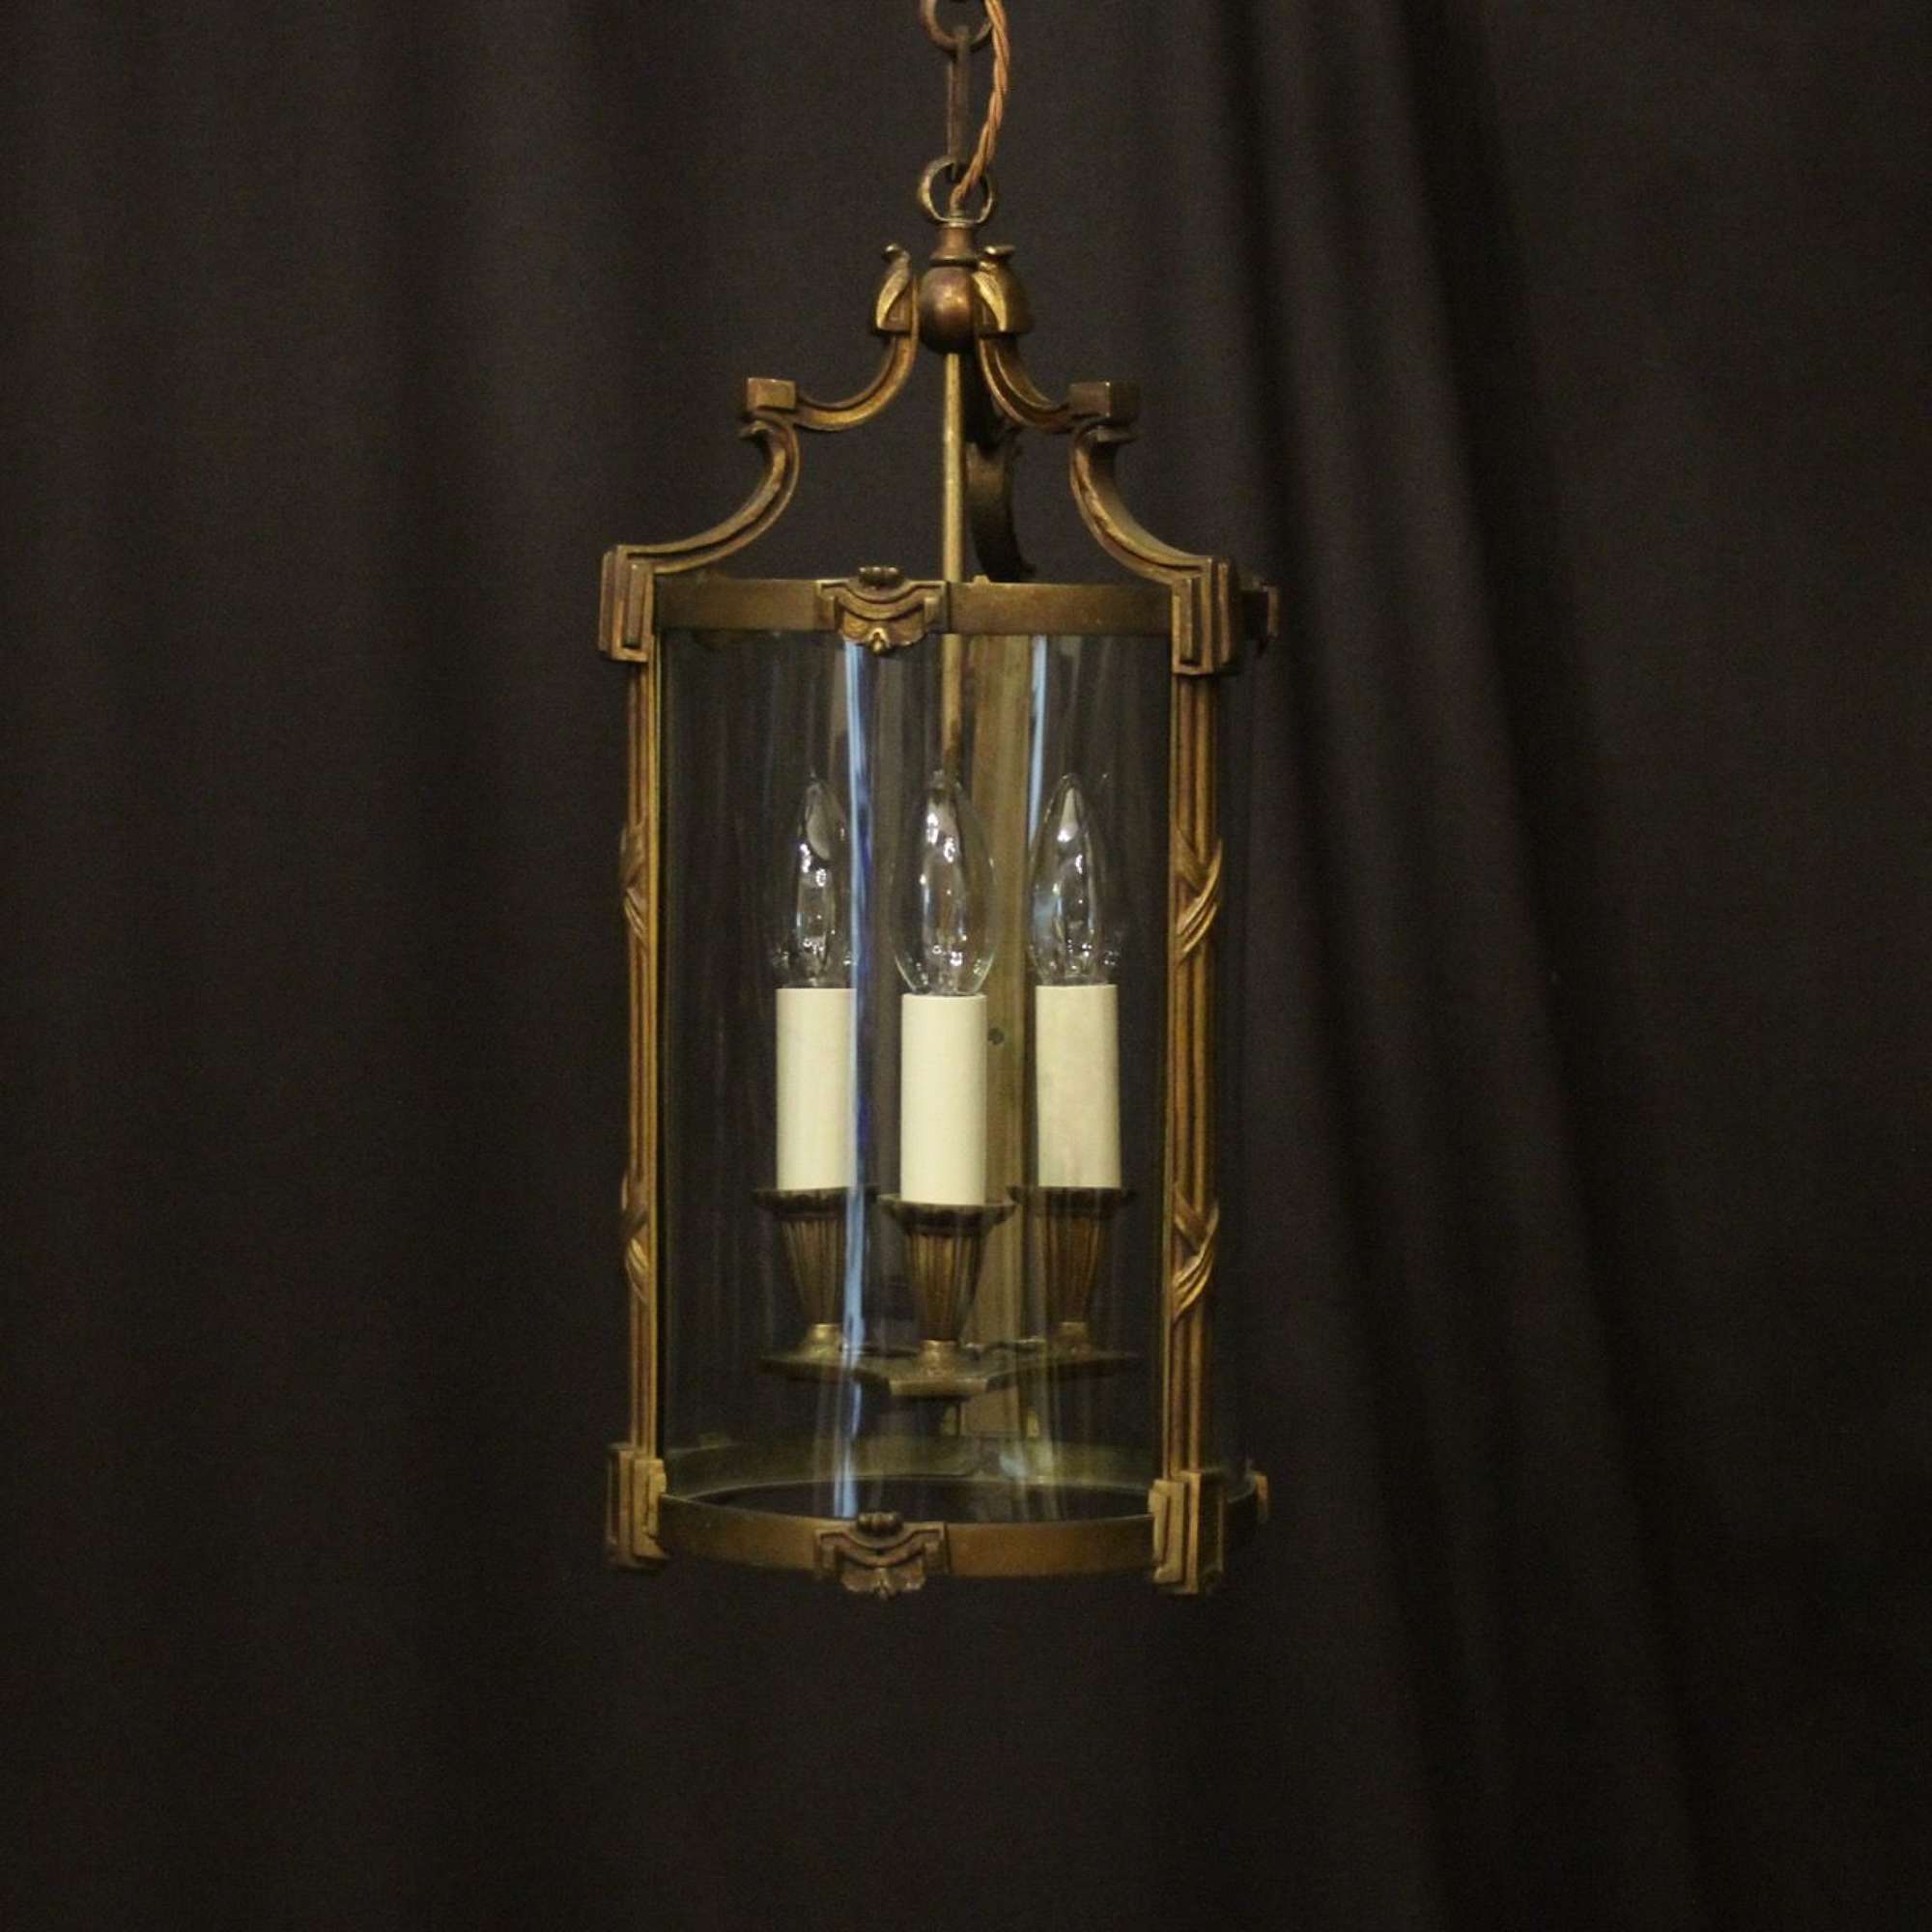 French Pair Of Gilded Bronze Antique Lanterns